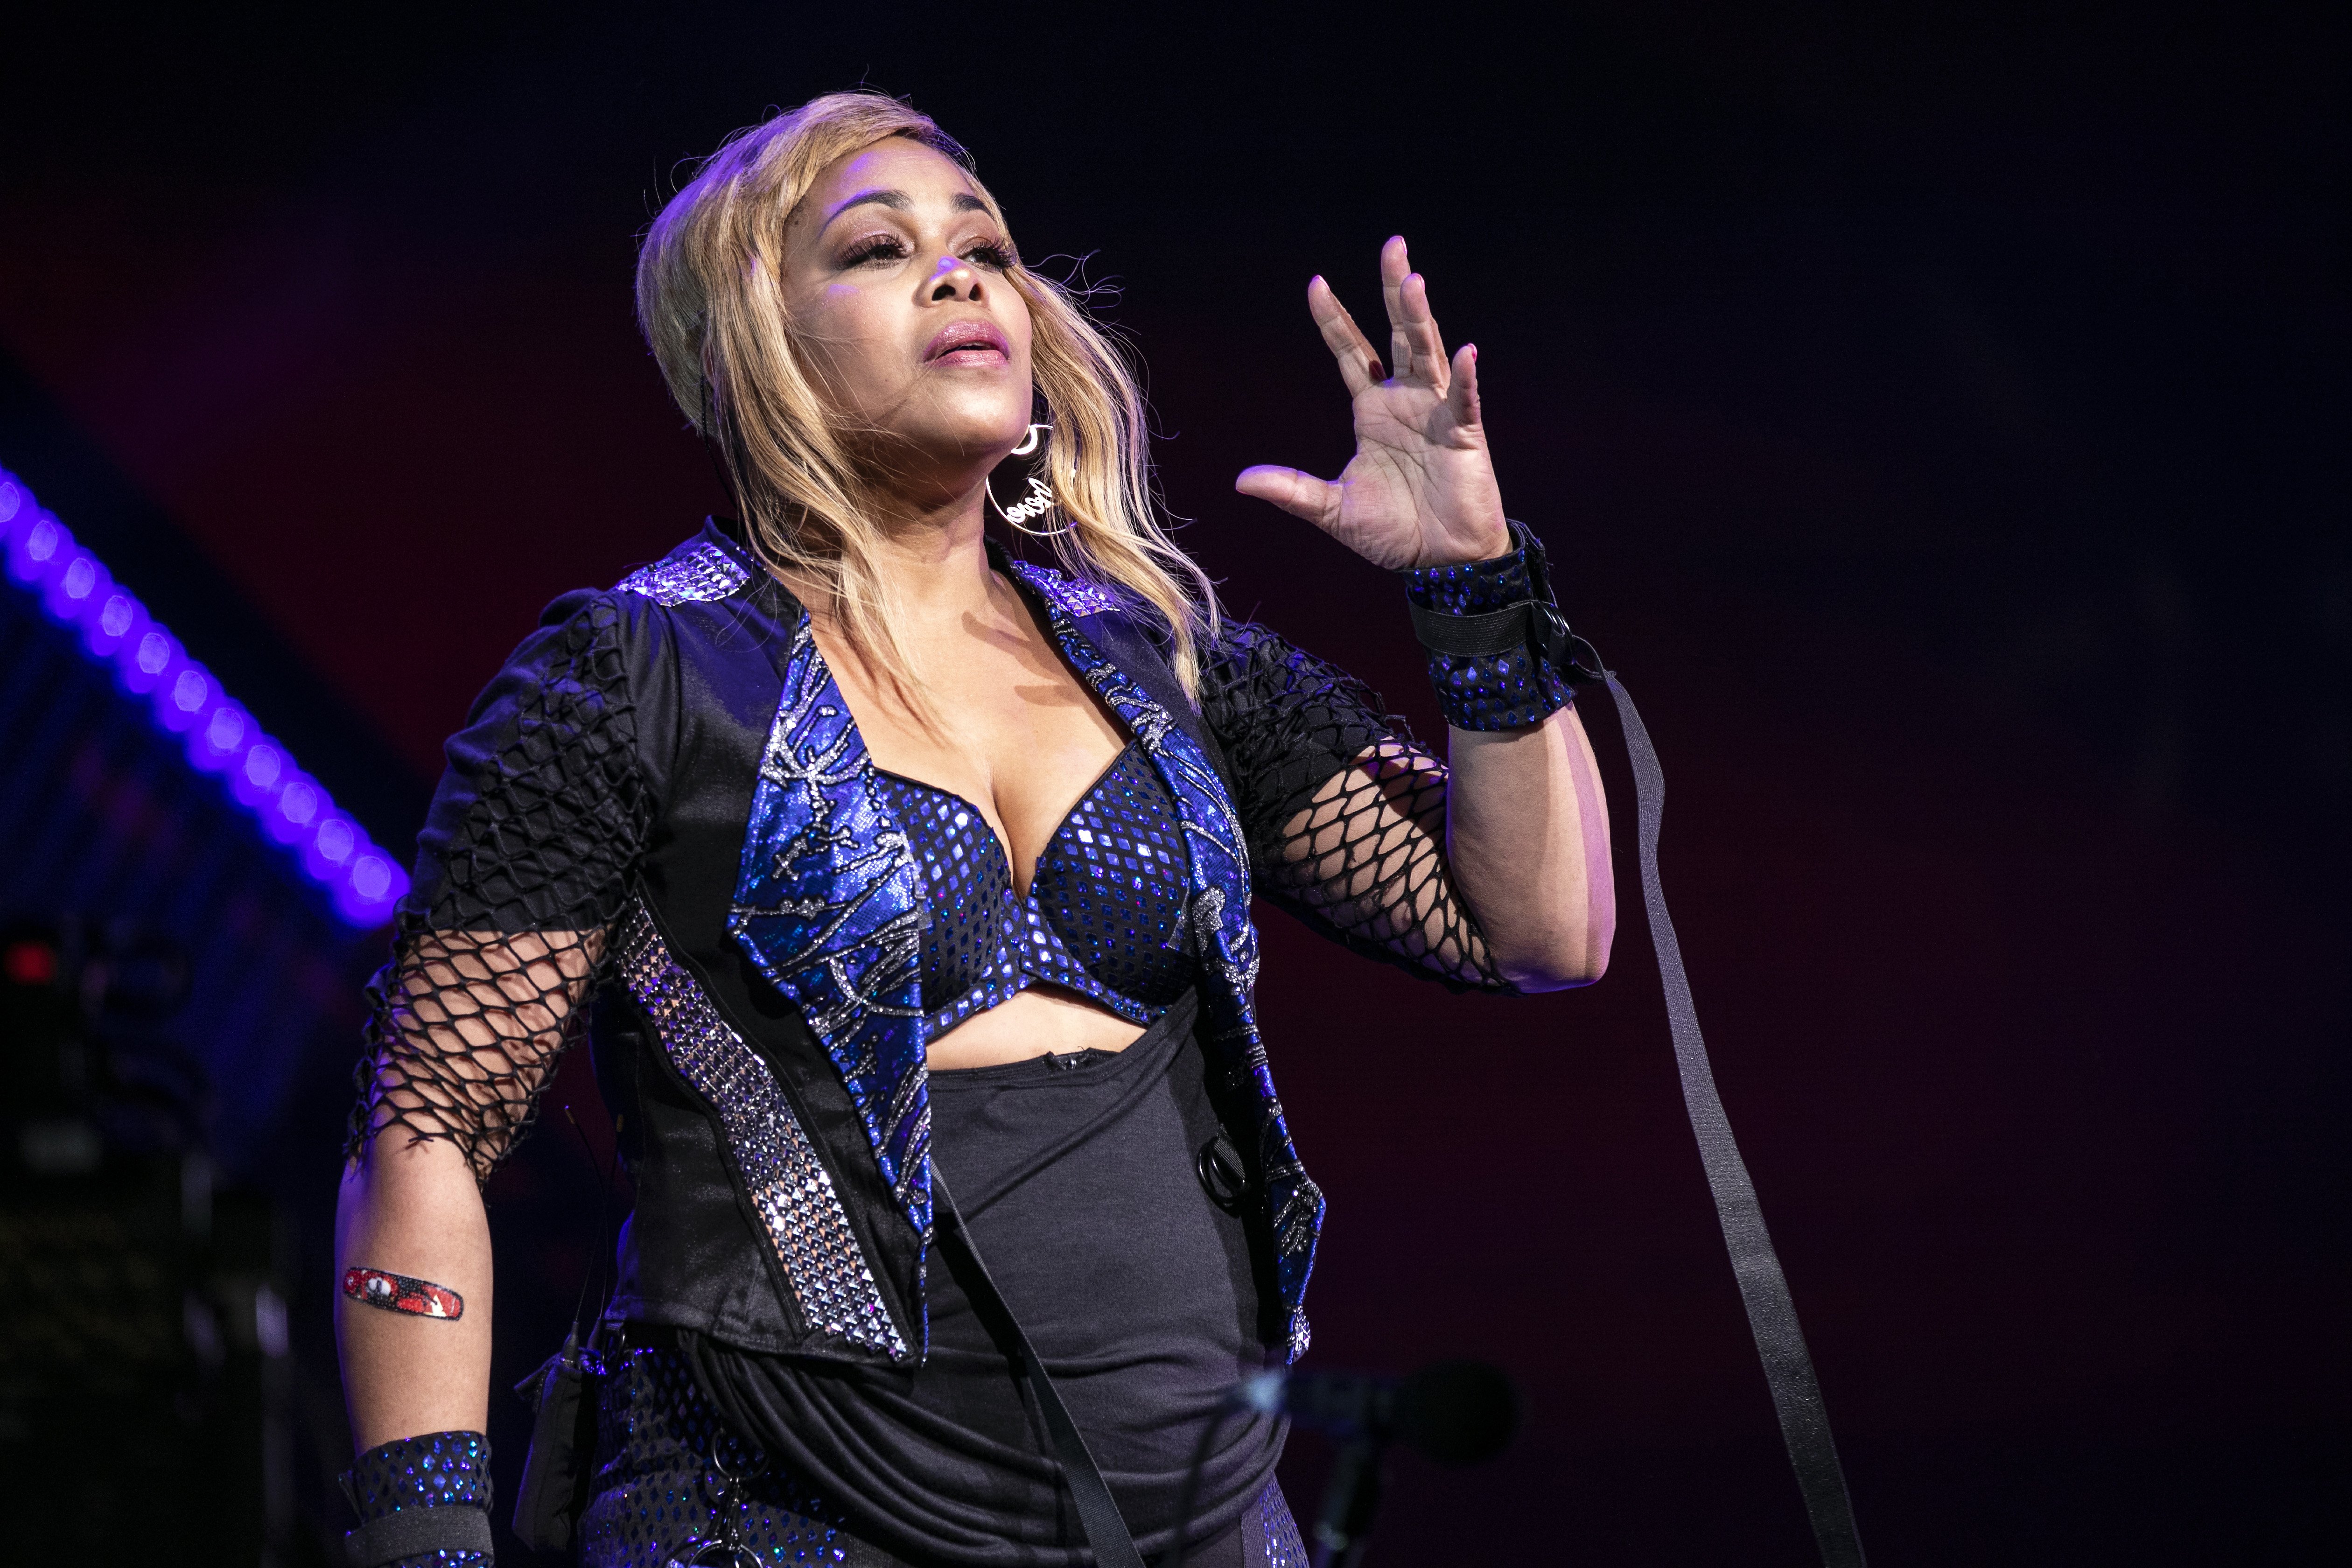 Singer T-Boz of TLC perform at PNC Music Pavilion on July 26, 2019 in Charlotte, North Carolina | Photo: GettyImages